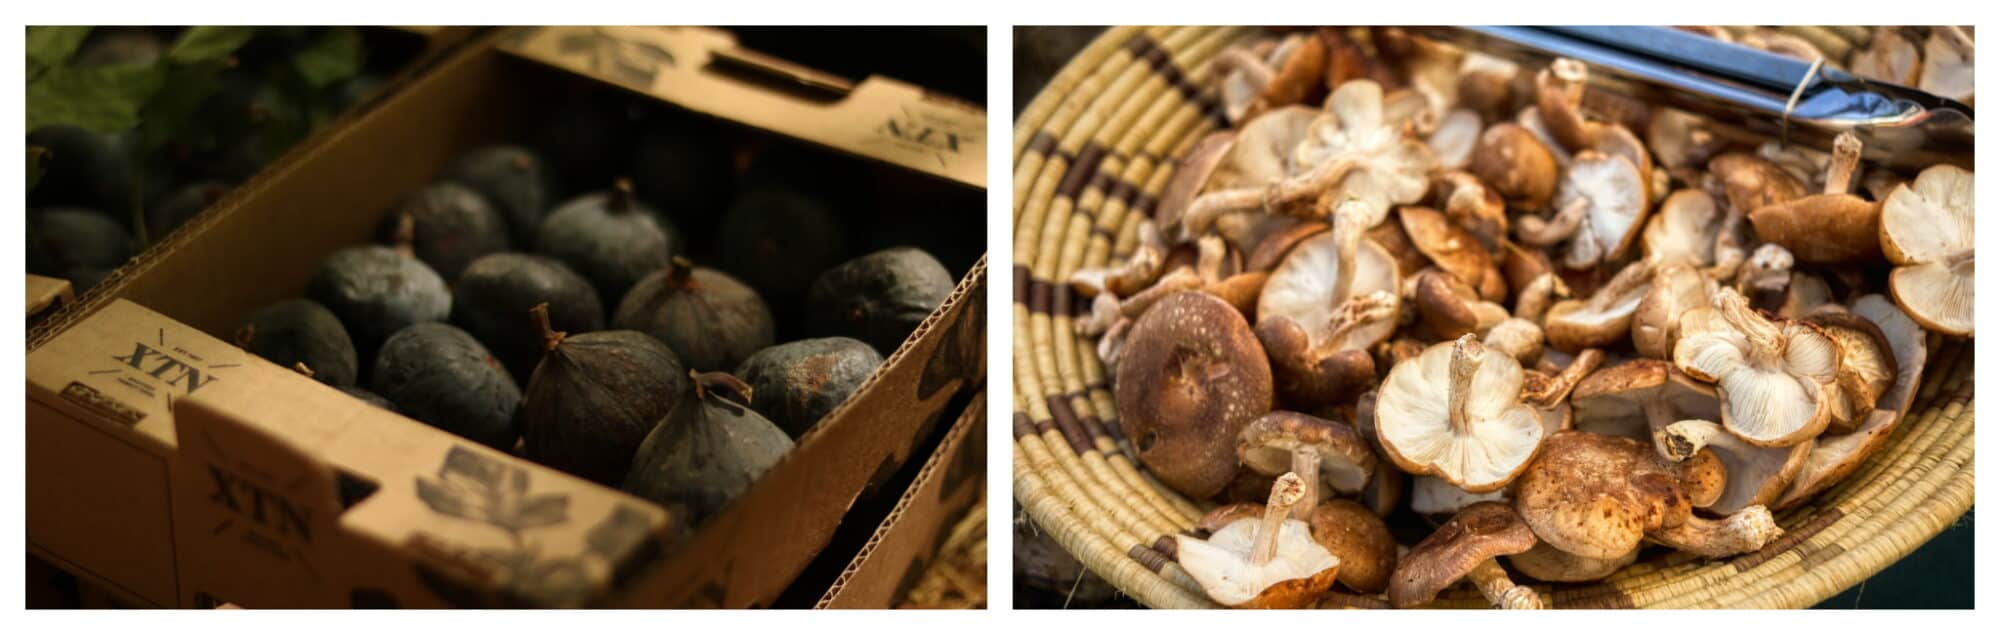 Left: figs in a storage box; right: wild mushrooms on a jute plate.